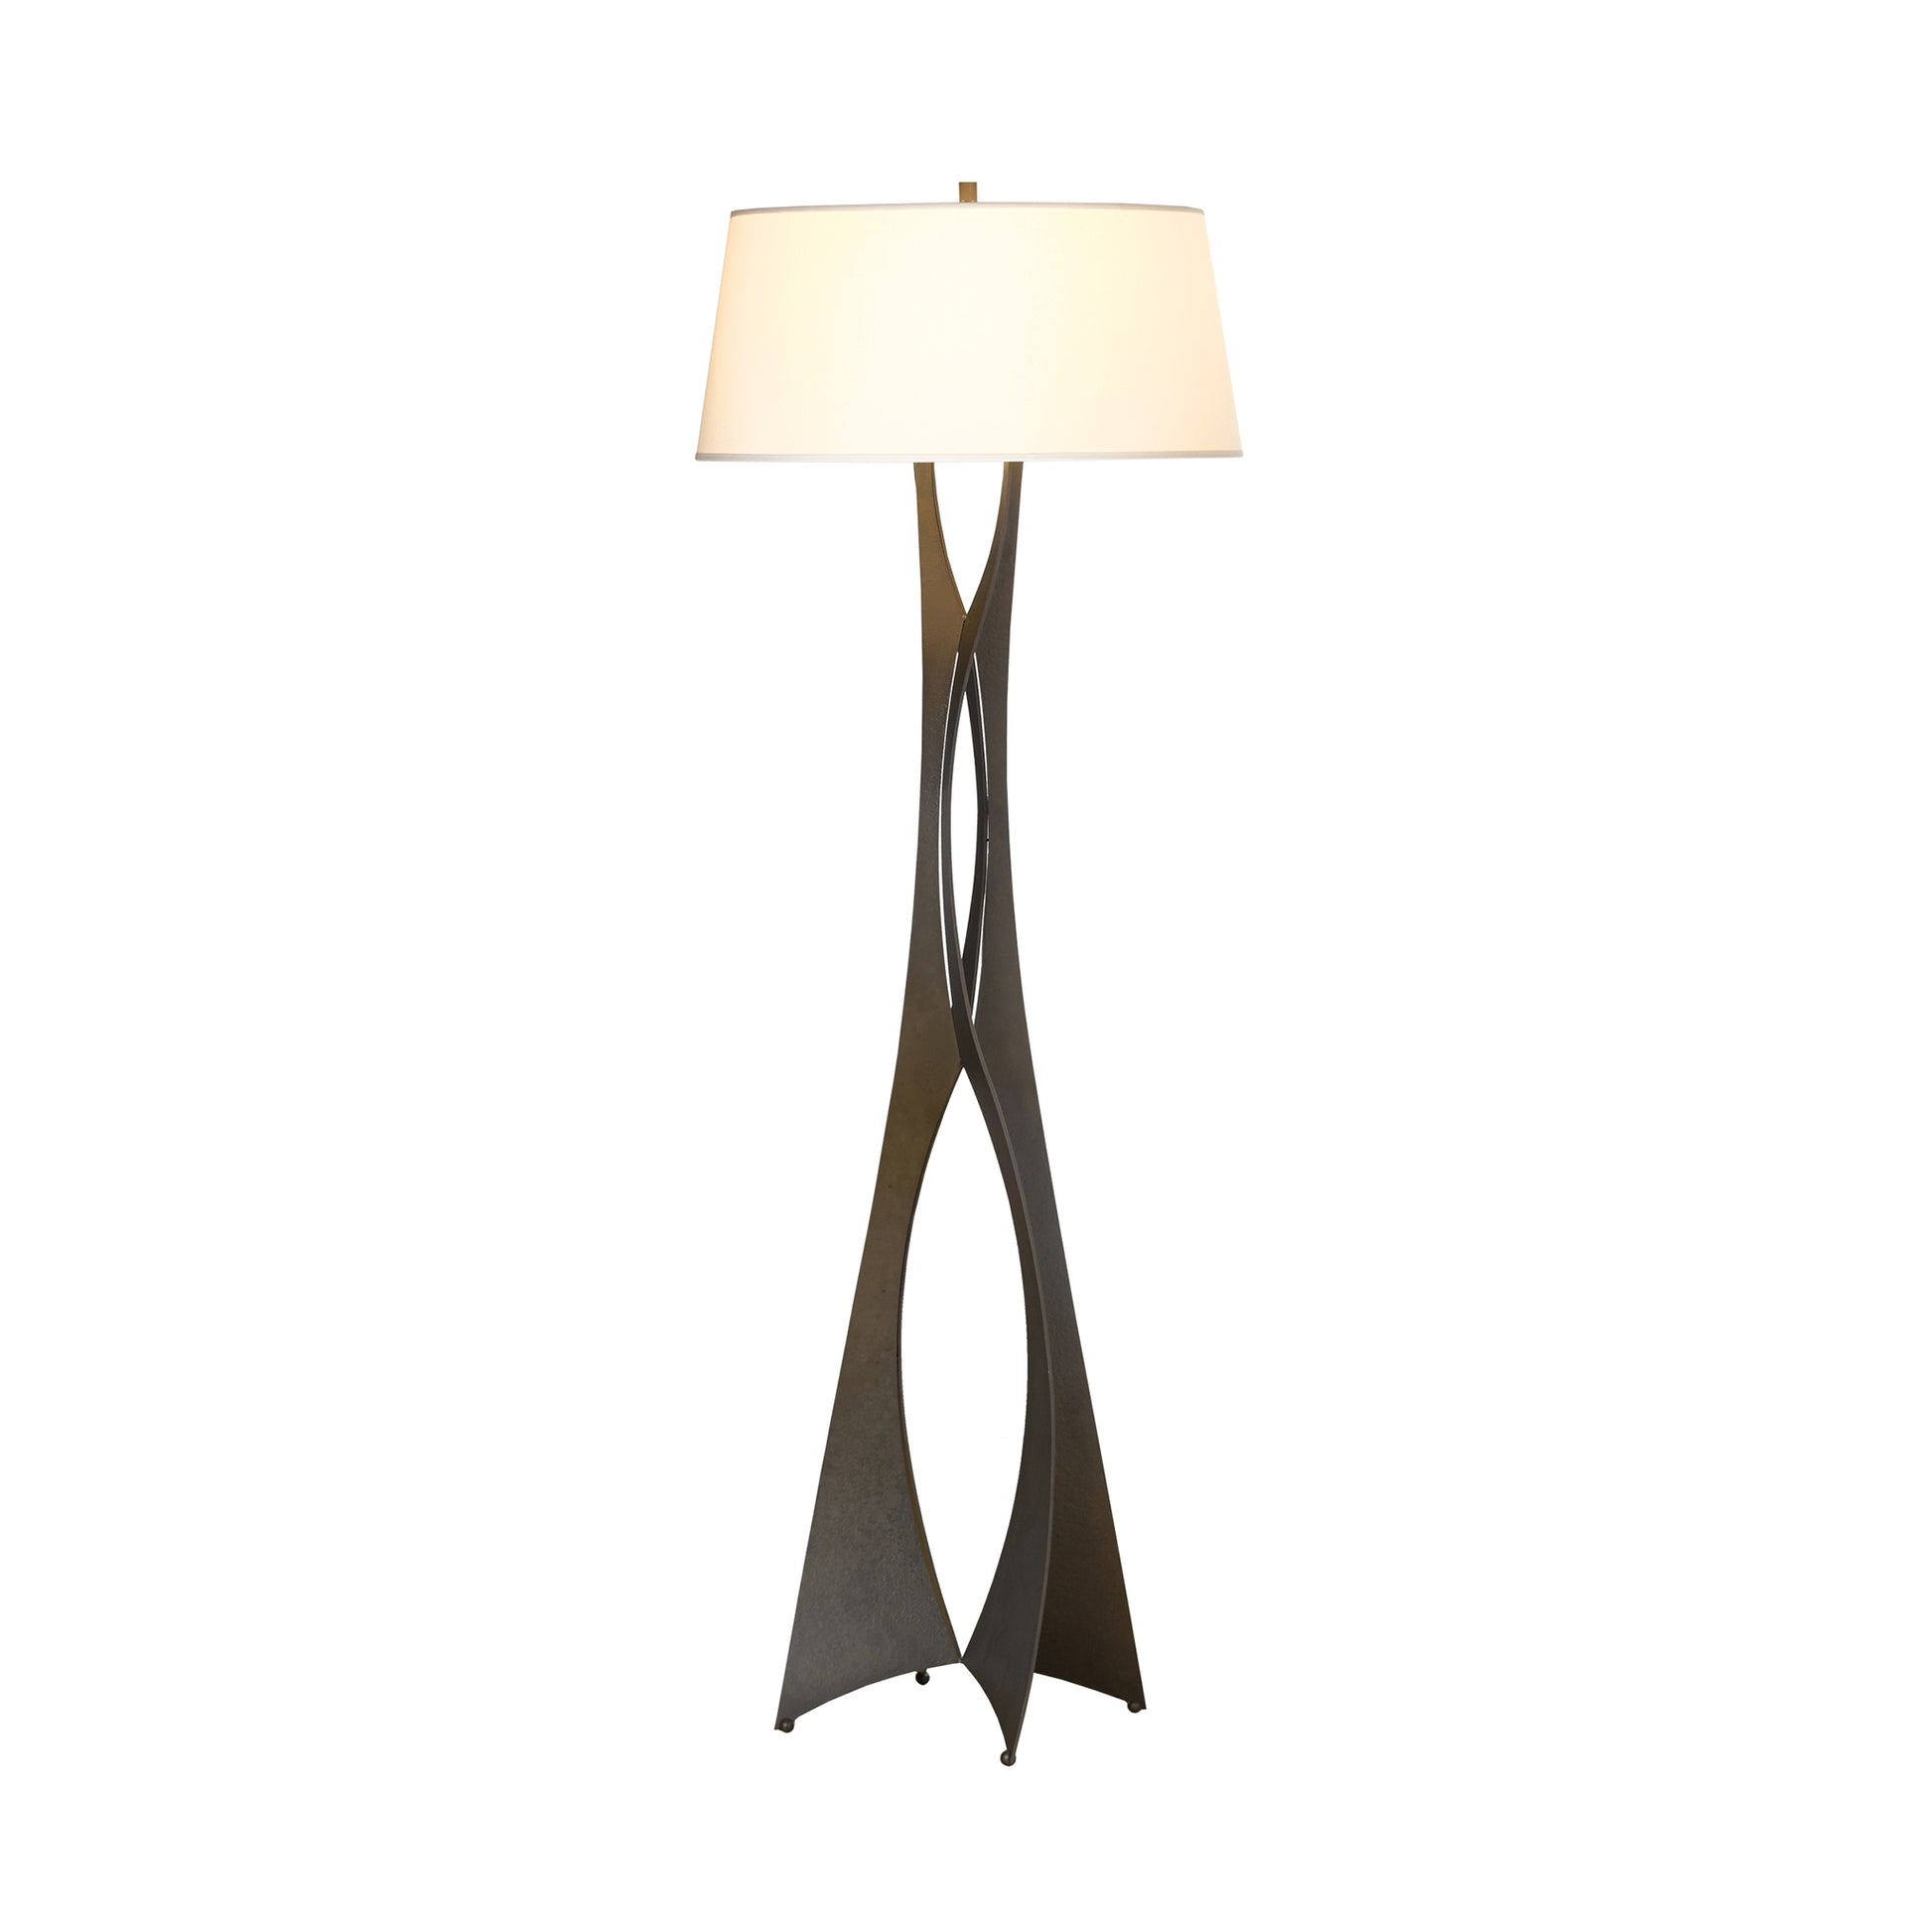 A Hubbardton Forge Moreau Floor Lamp, with a metal base and a white shade, featuring a sleek metal finish. Perfect for adding modern lighting to any room.